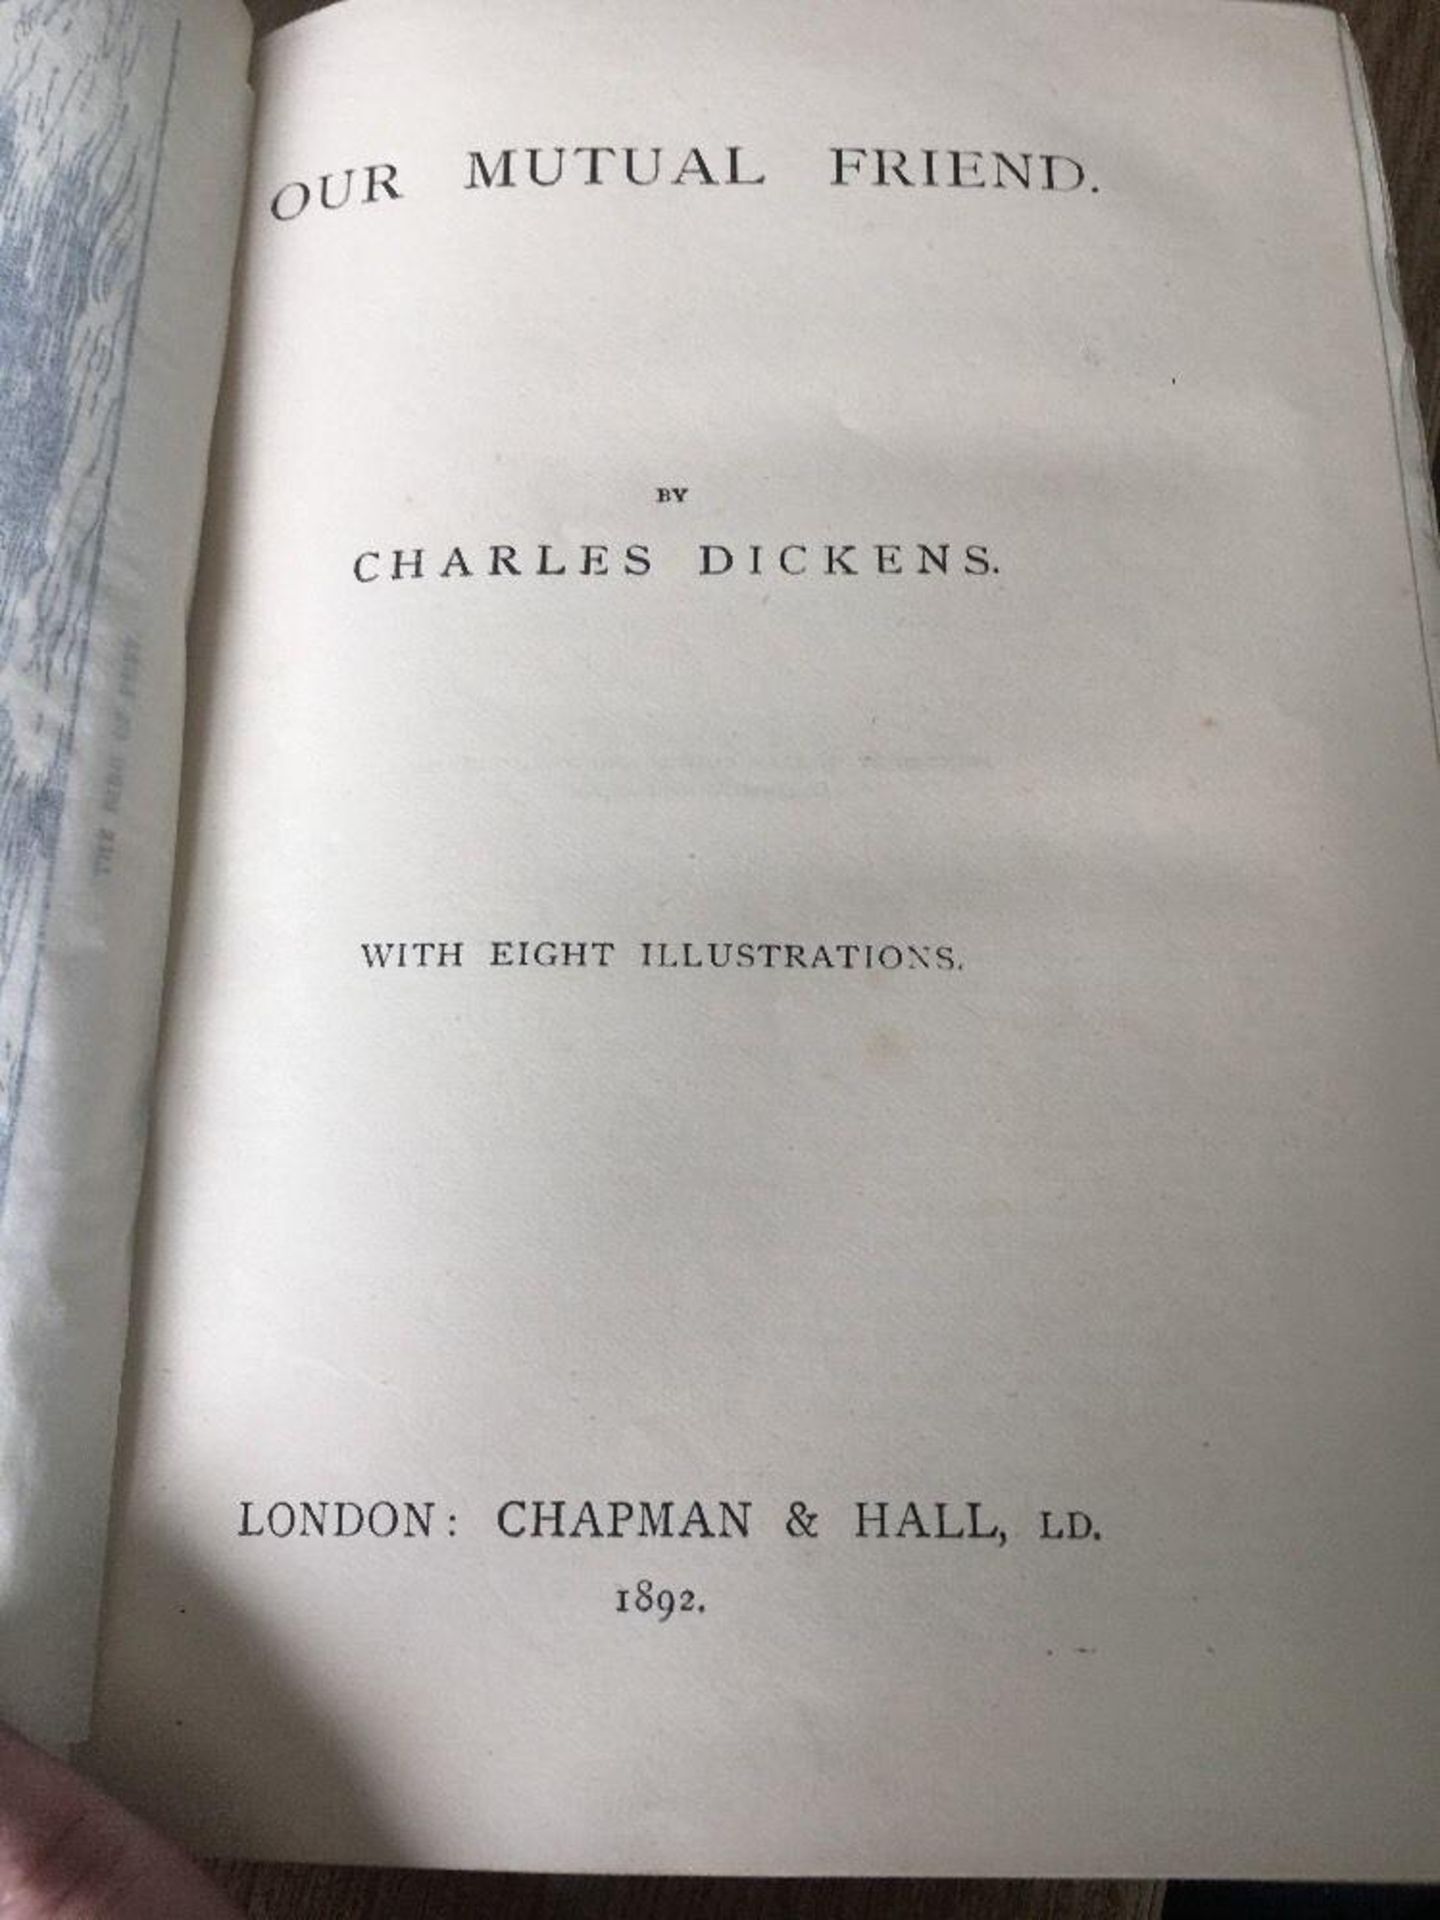 Antique - Charles Dickens - Our Mutual Friend - Chapman & Hall - 1892 - Image 3 of 3